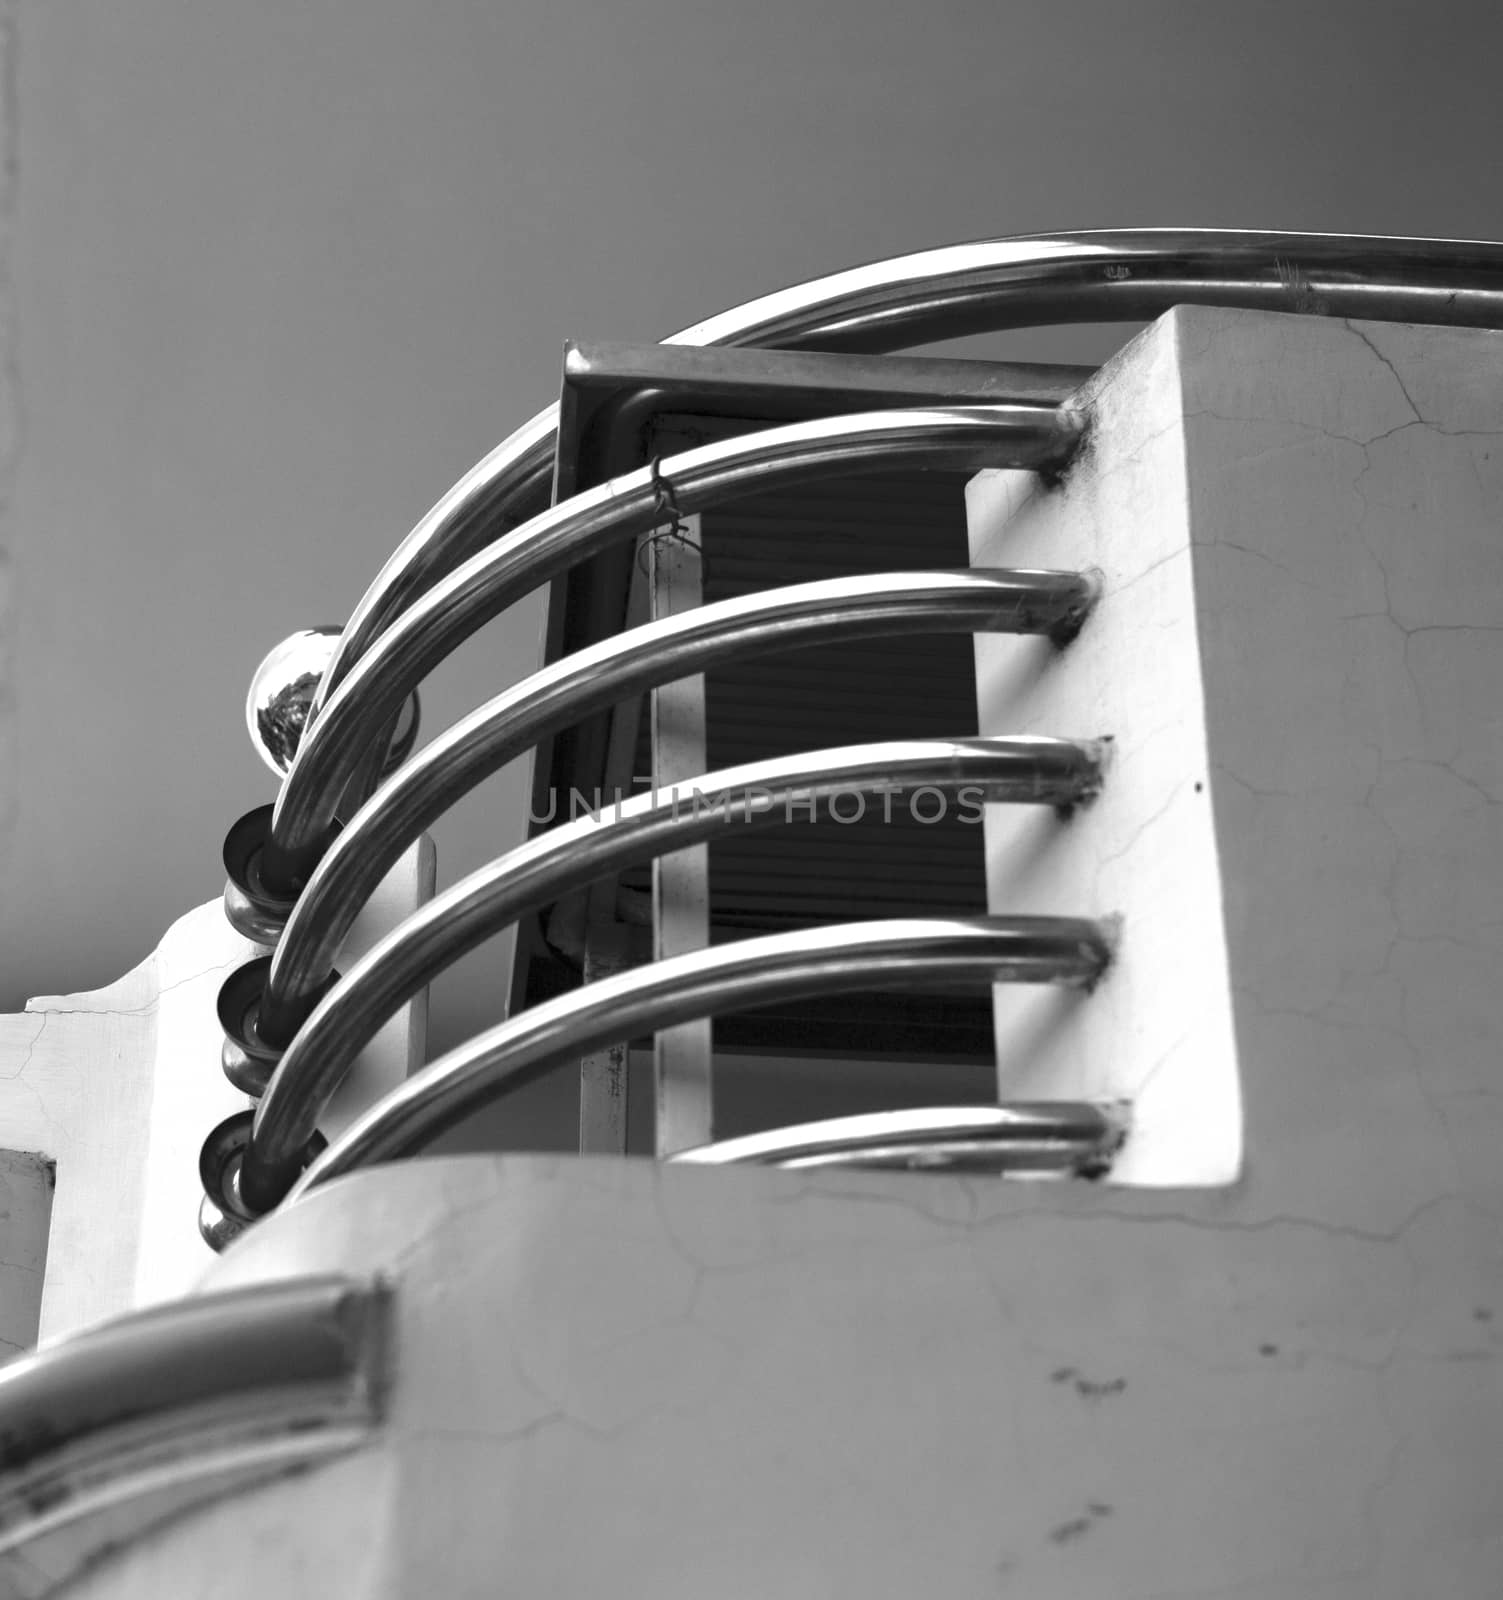 BLACK AND WHITE PHOTO OF CURVING STAINLESS STEEL HANDRAIL